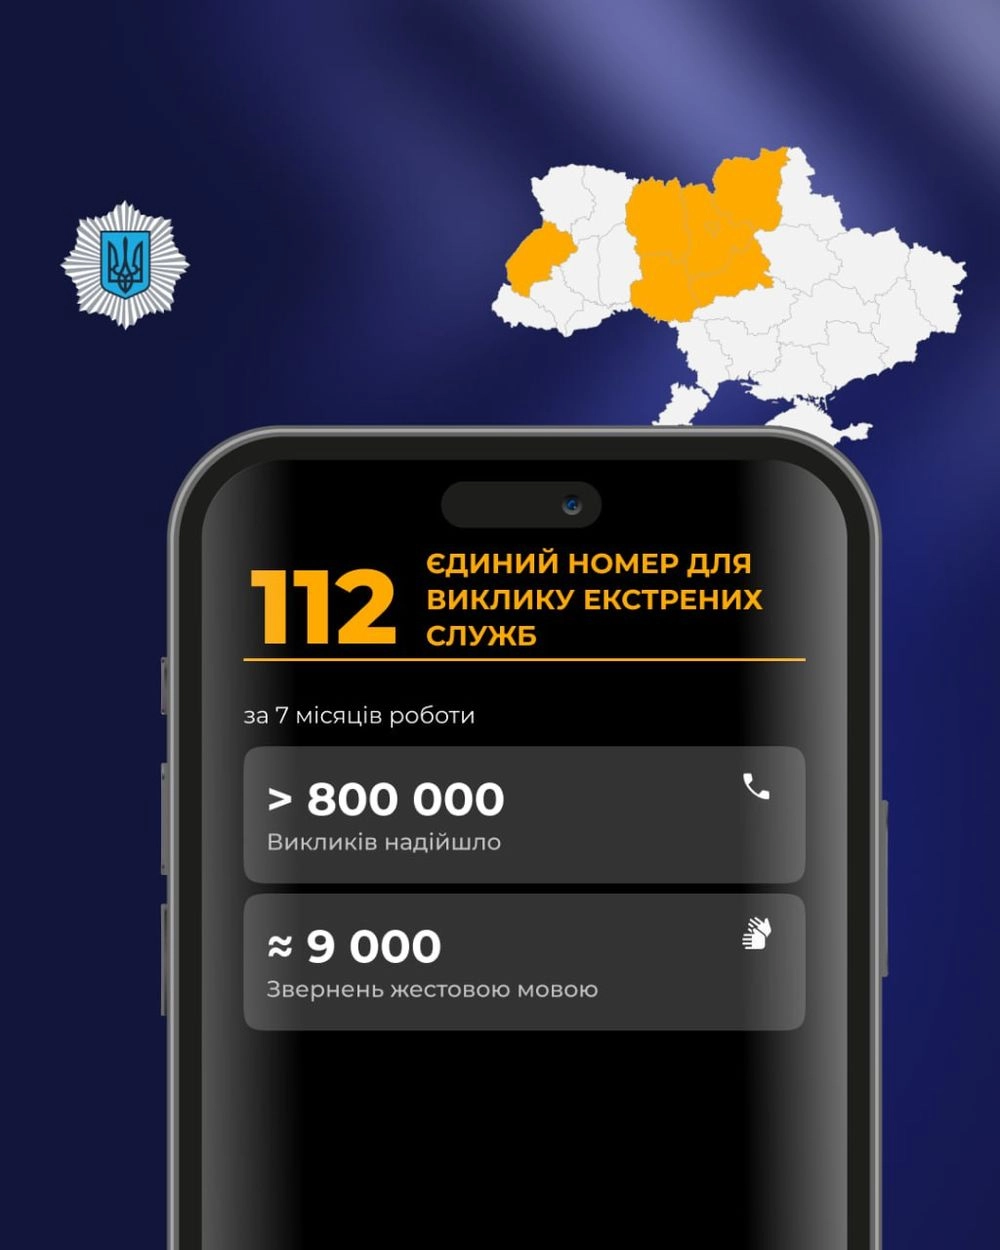 Ministry of Internal Affairs: over 800 thousand calls handled by 112 operators in the first 7 months of operation